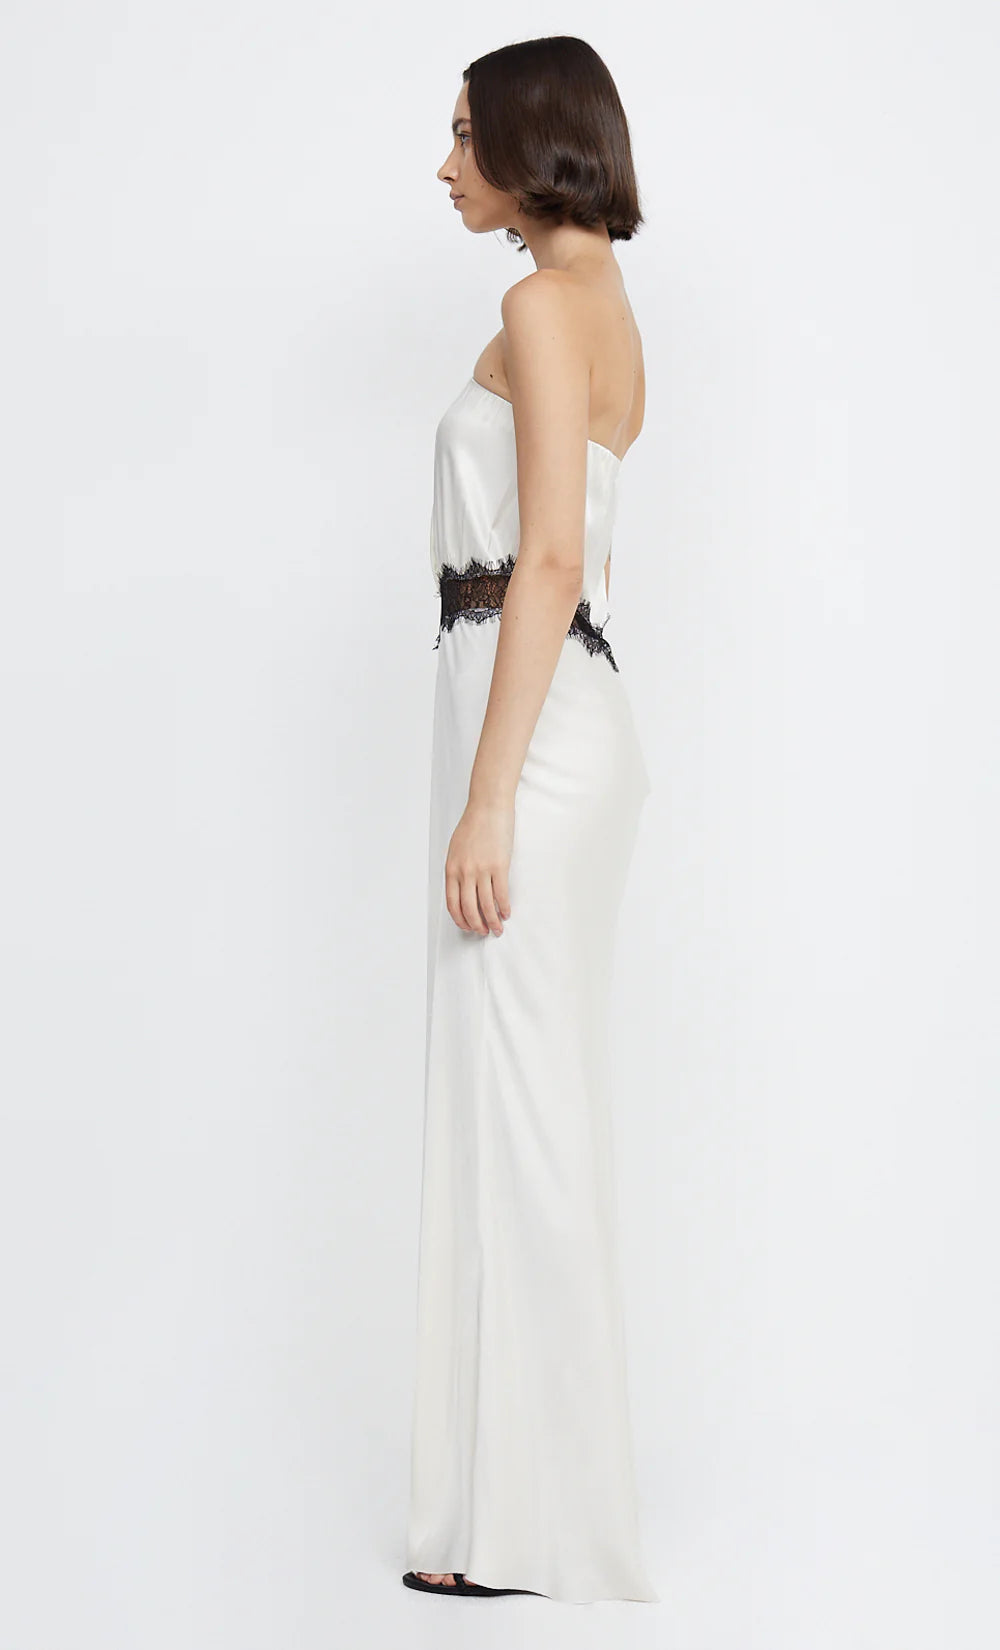 Spencer Lace Strapless Maxi- Ivory/ Black